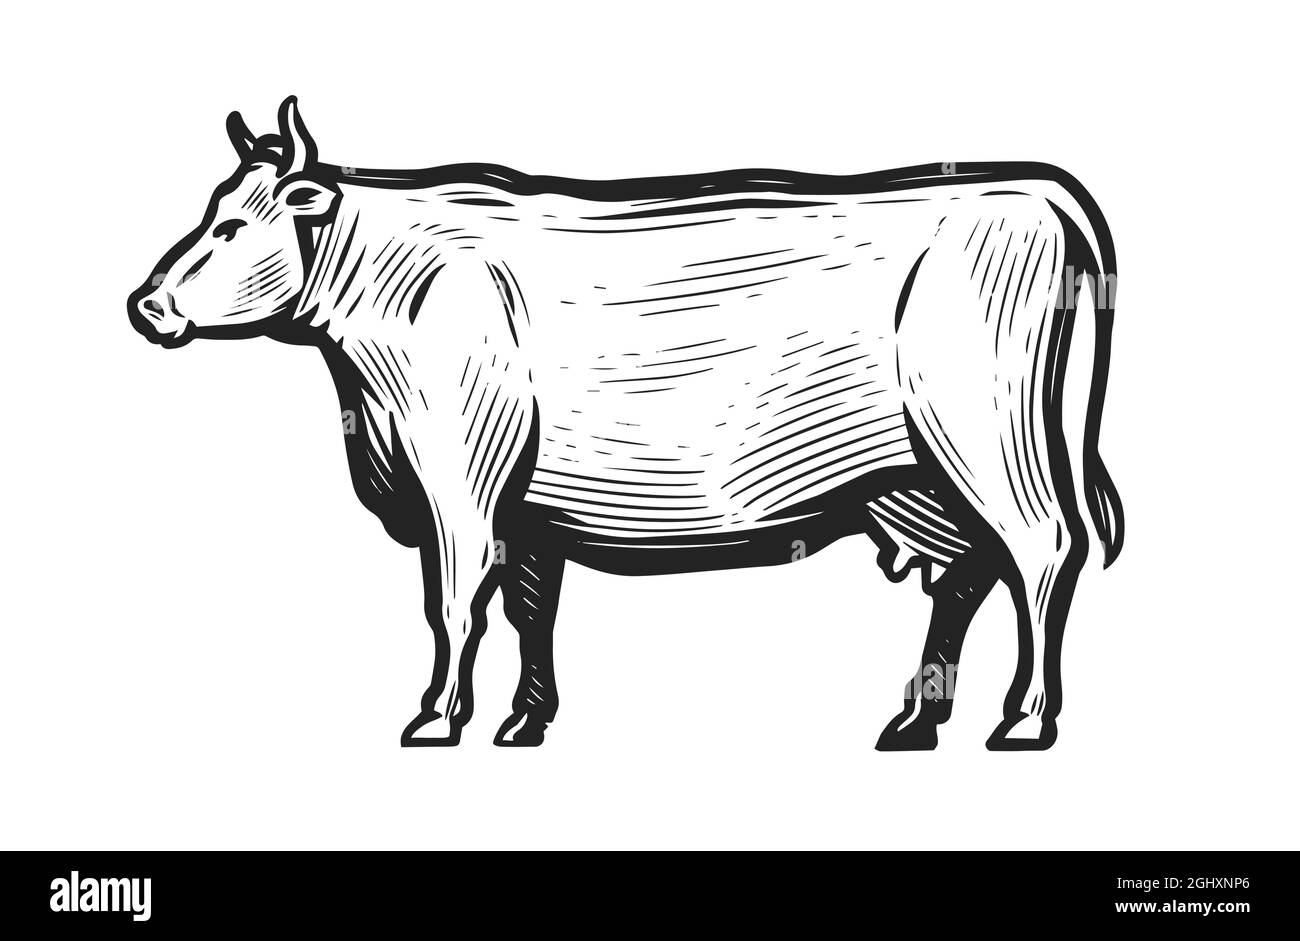 Hand-drawn sketch of cow isolated on white background. Side view ...